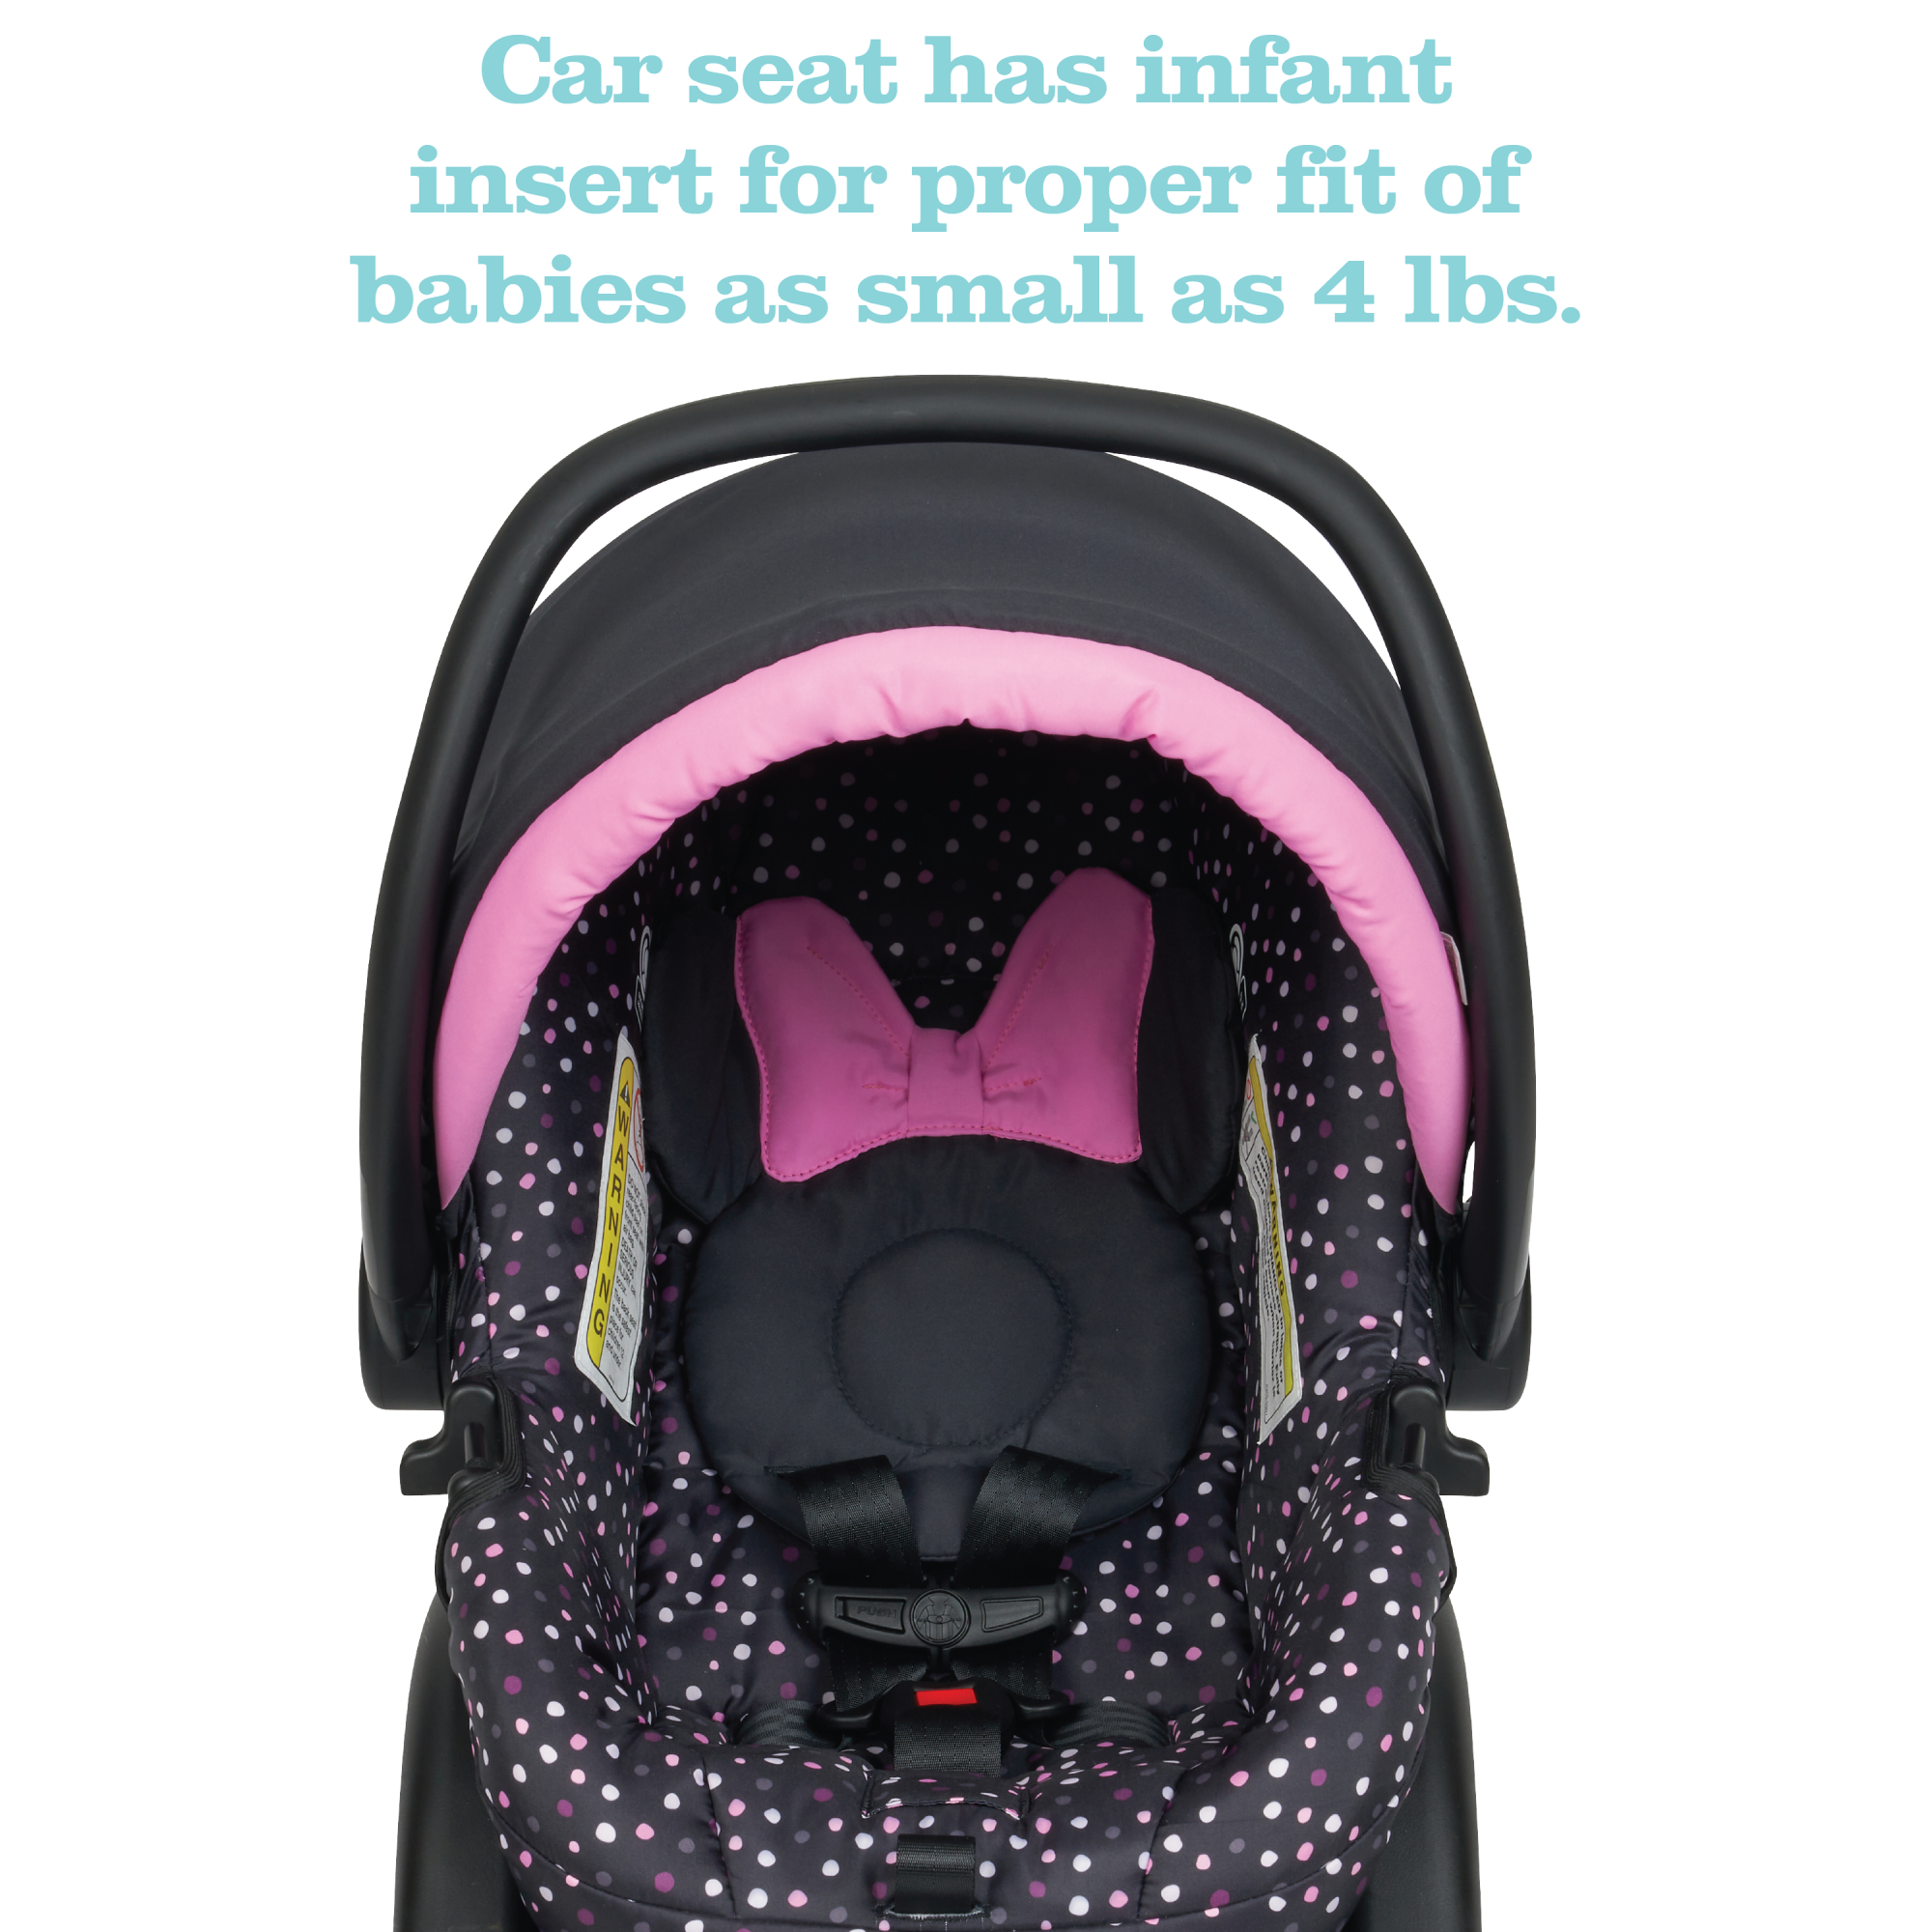 Disney Baby Disney Simple Fold™ LX Travel System - Minnie Dot Party - car seat has infant insert for proper fit of babies as small as 4 lbs.